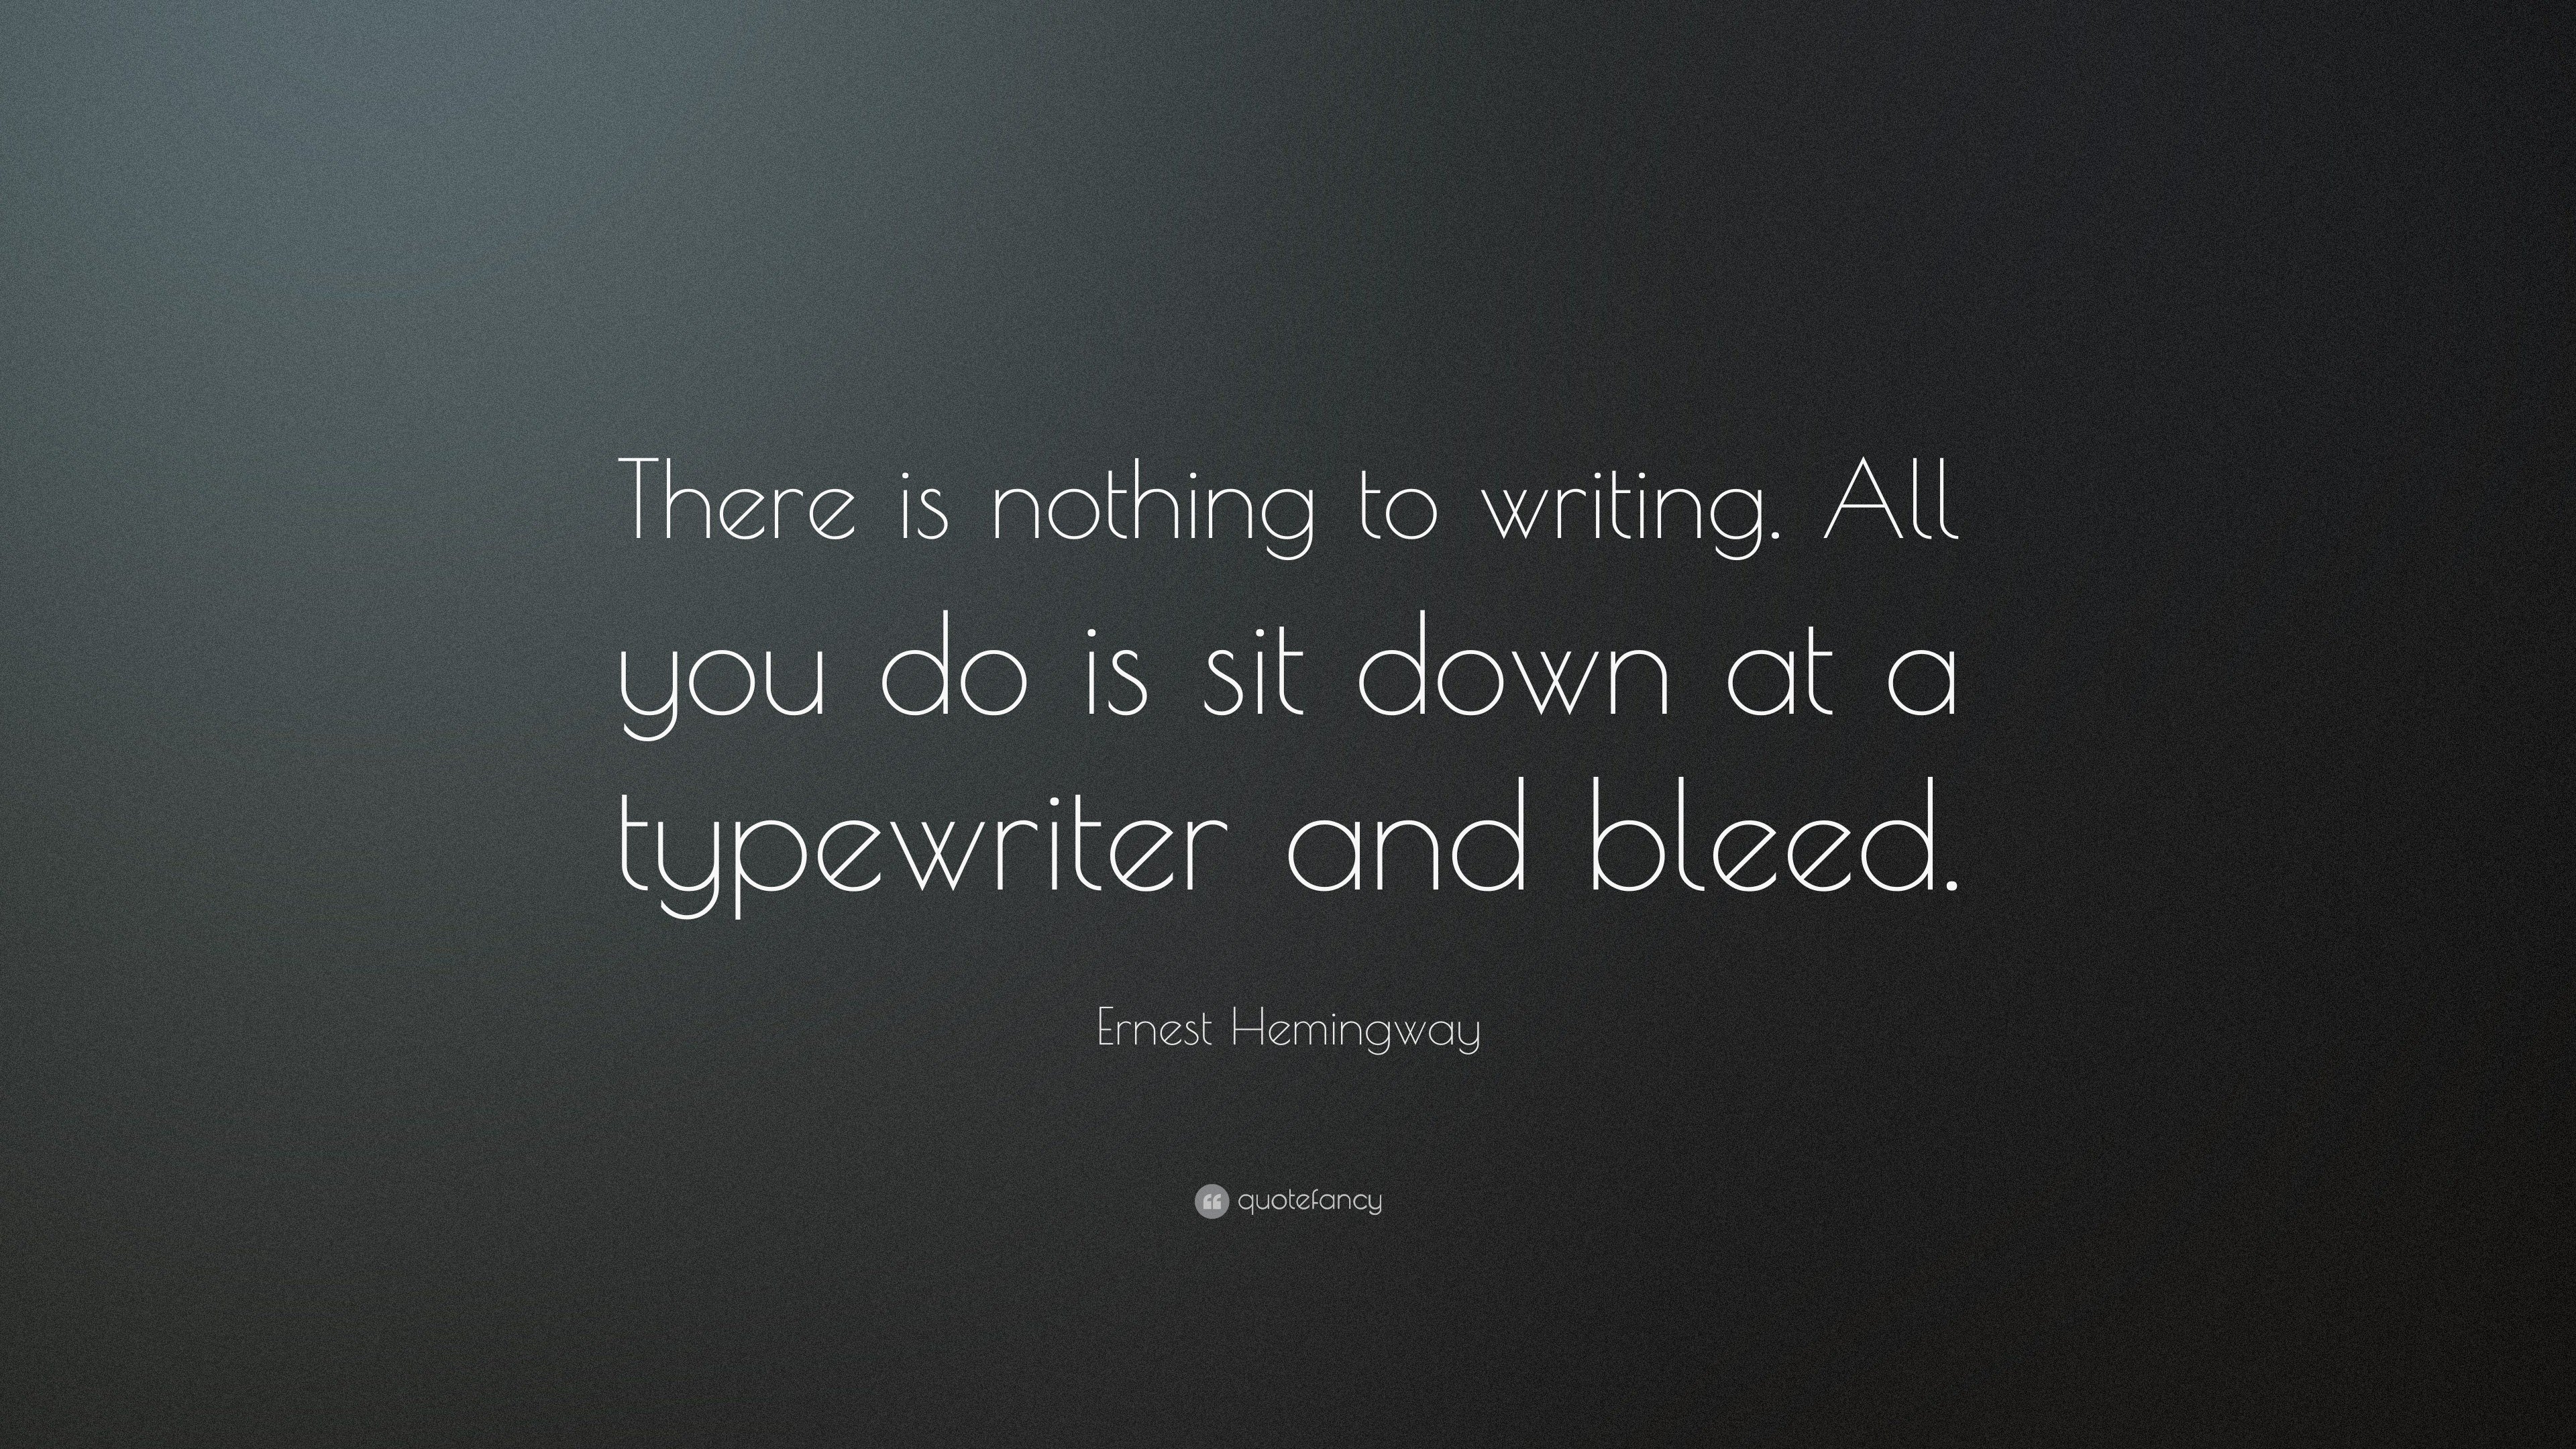 3840x2160 Ernest Hemingway Quote: “There is nothing to writing. All you do is sit